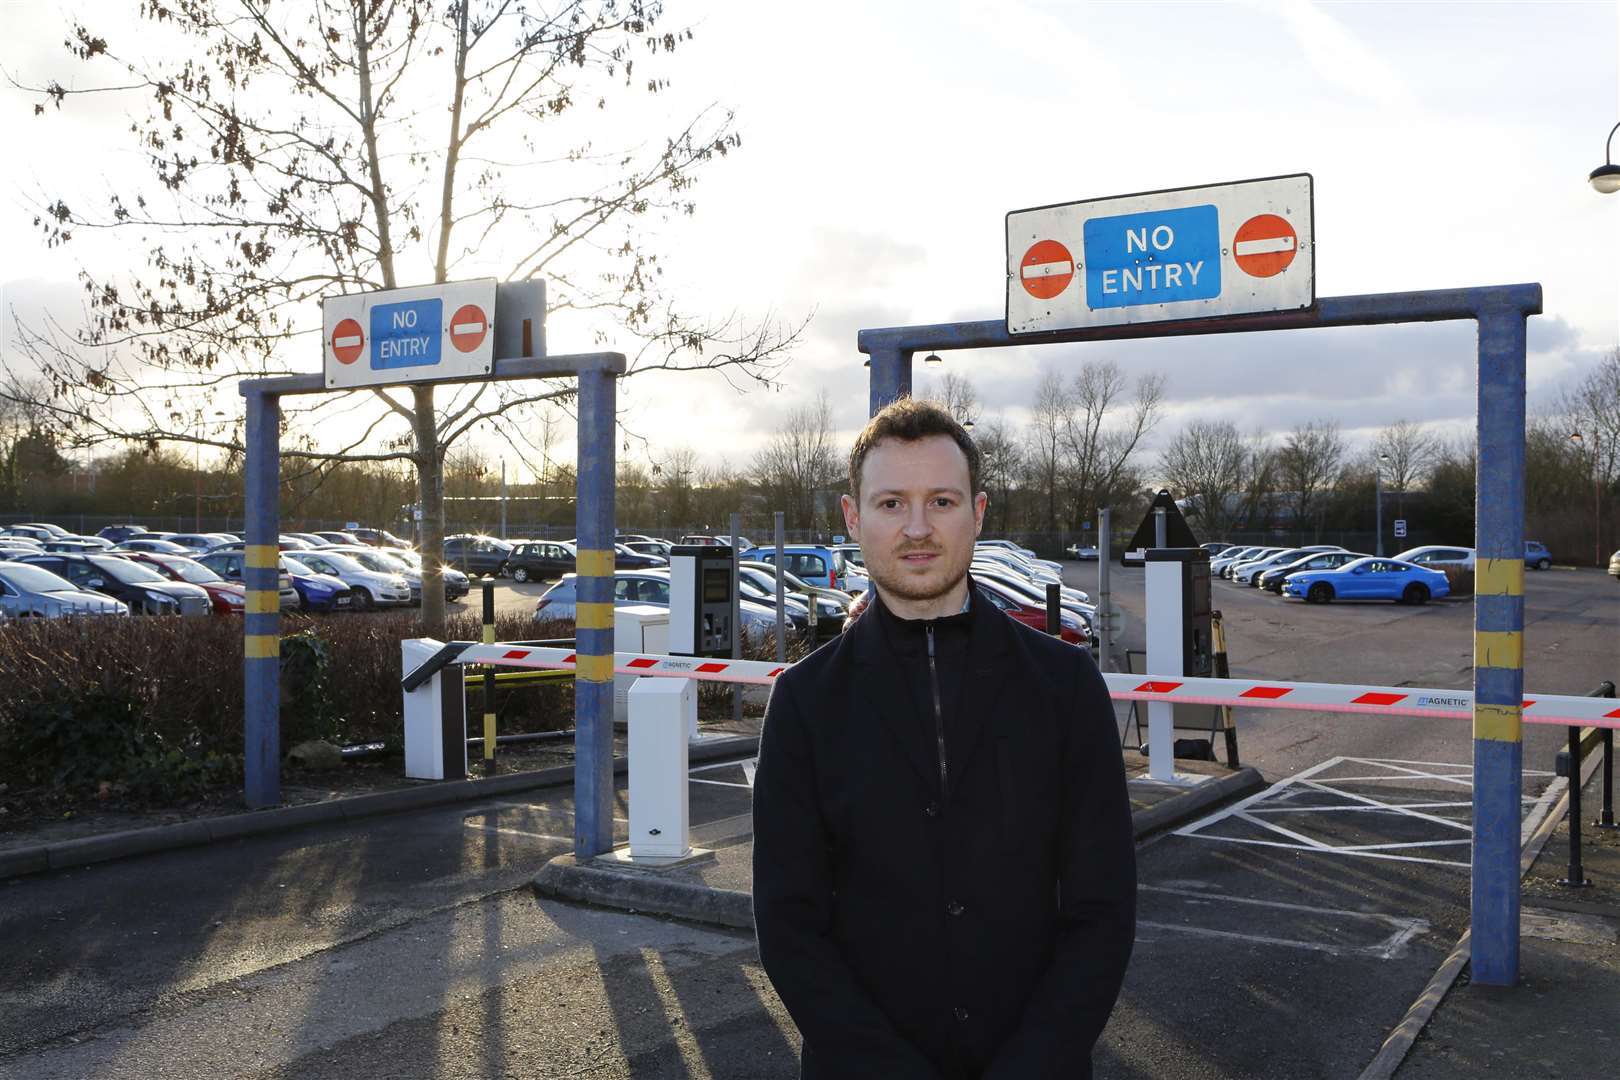 Cllr Ben Fitter-Harding has been helping the authority with its car park revamps